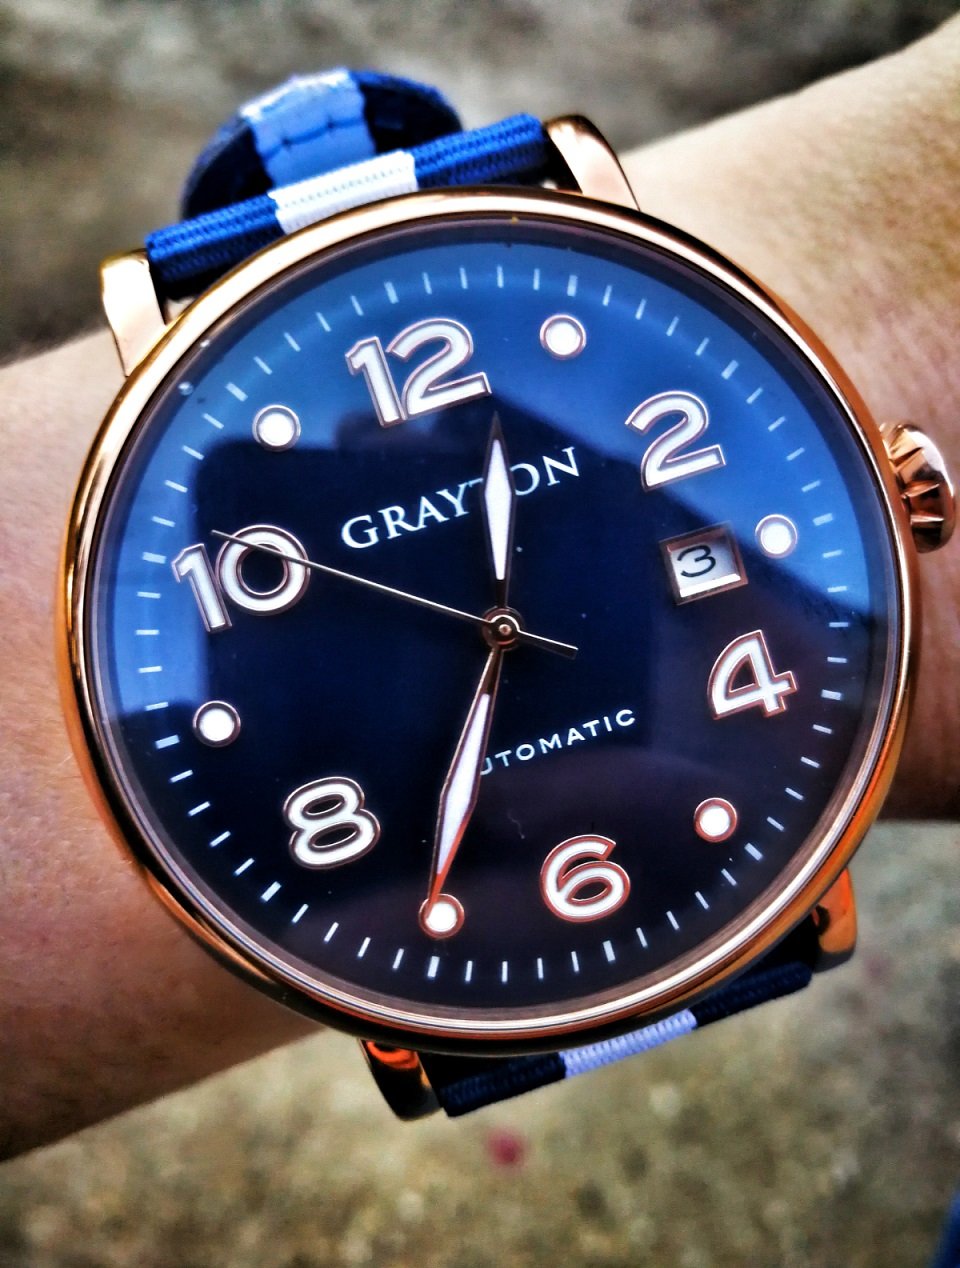 Grayton Watches - Product Review | Style & Life by Susana